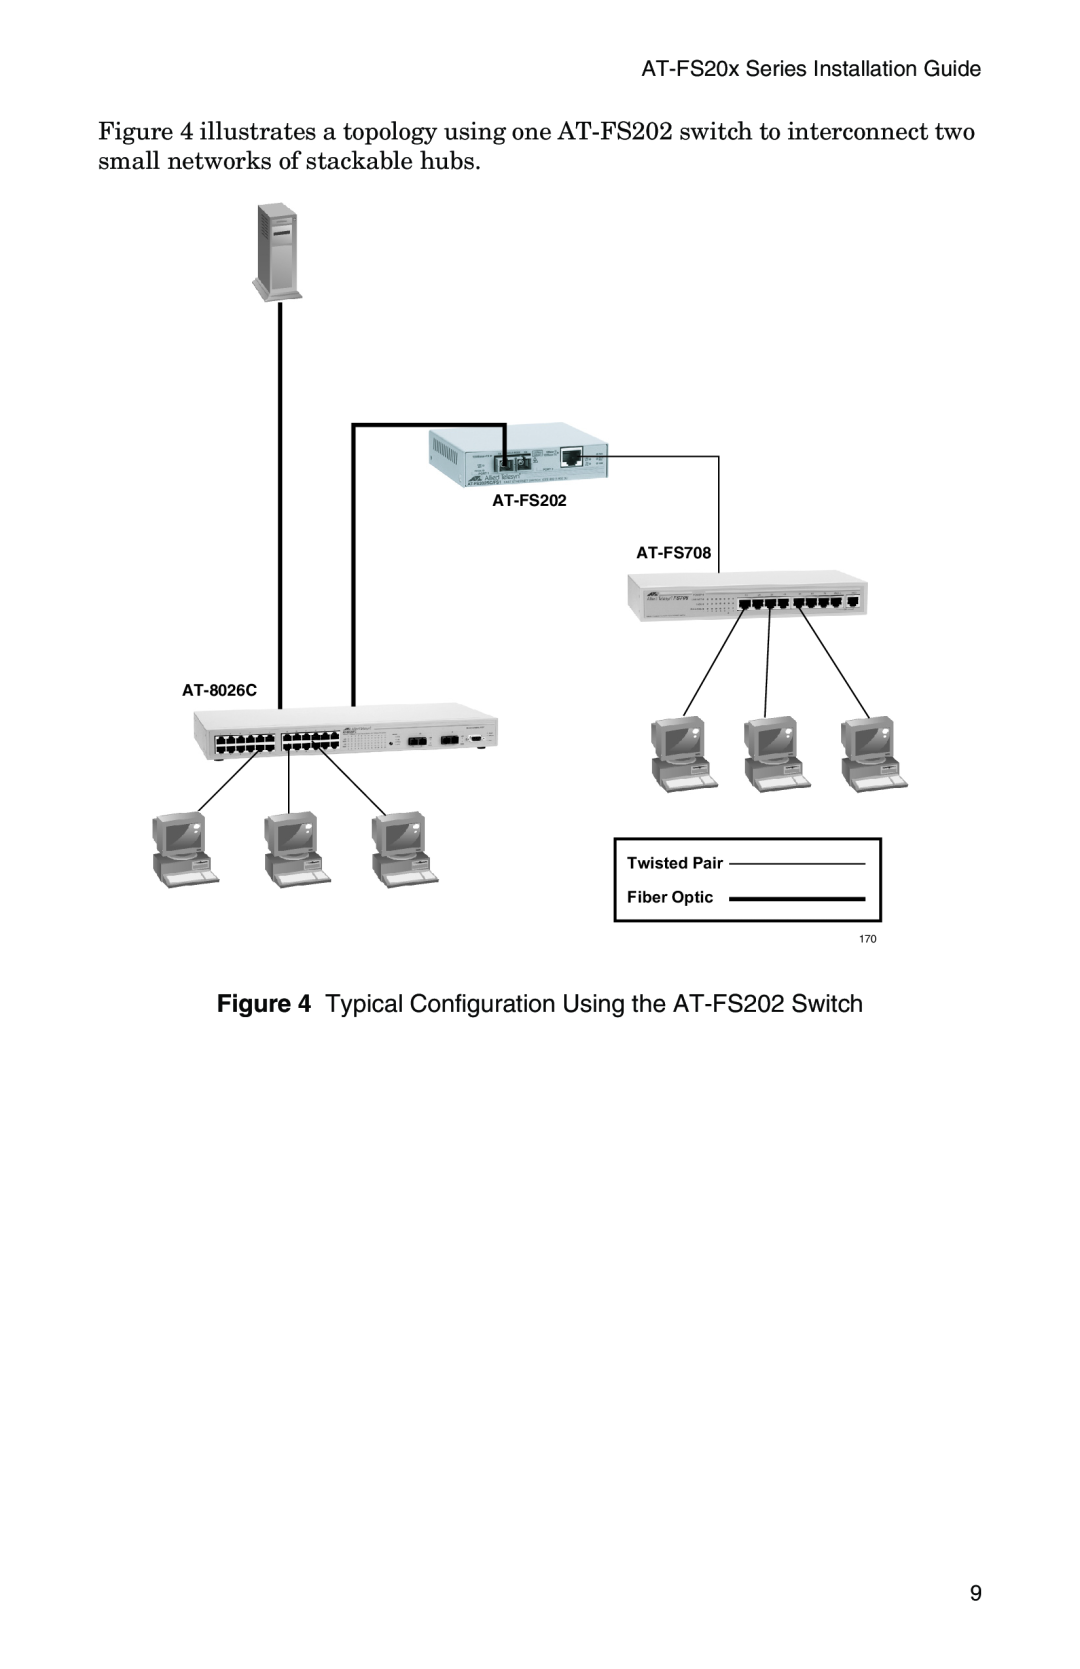 IBM AT-FS201 Typical Configuration Using the AT-FS202 Switch, AT-FS202 AT-FS708 AT-8026C, Twisted Pair Fiber Optic 